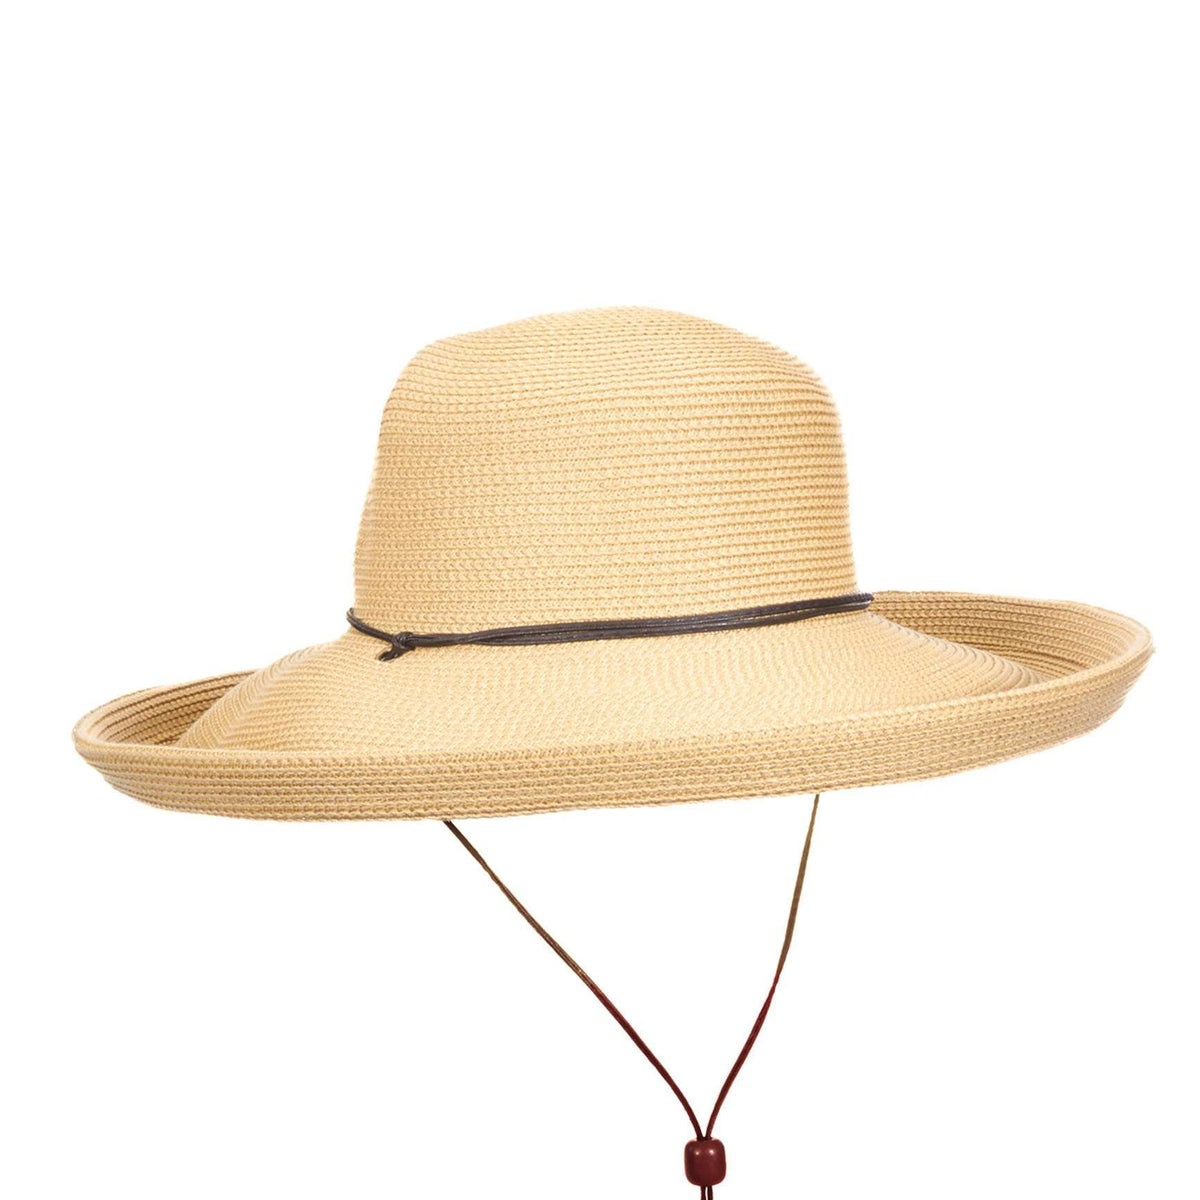 Up Turned Brim Summer Hat - Scala Collection Hats